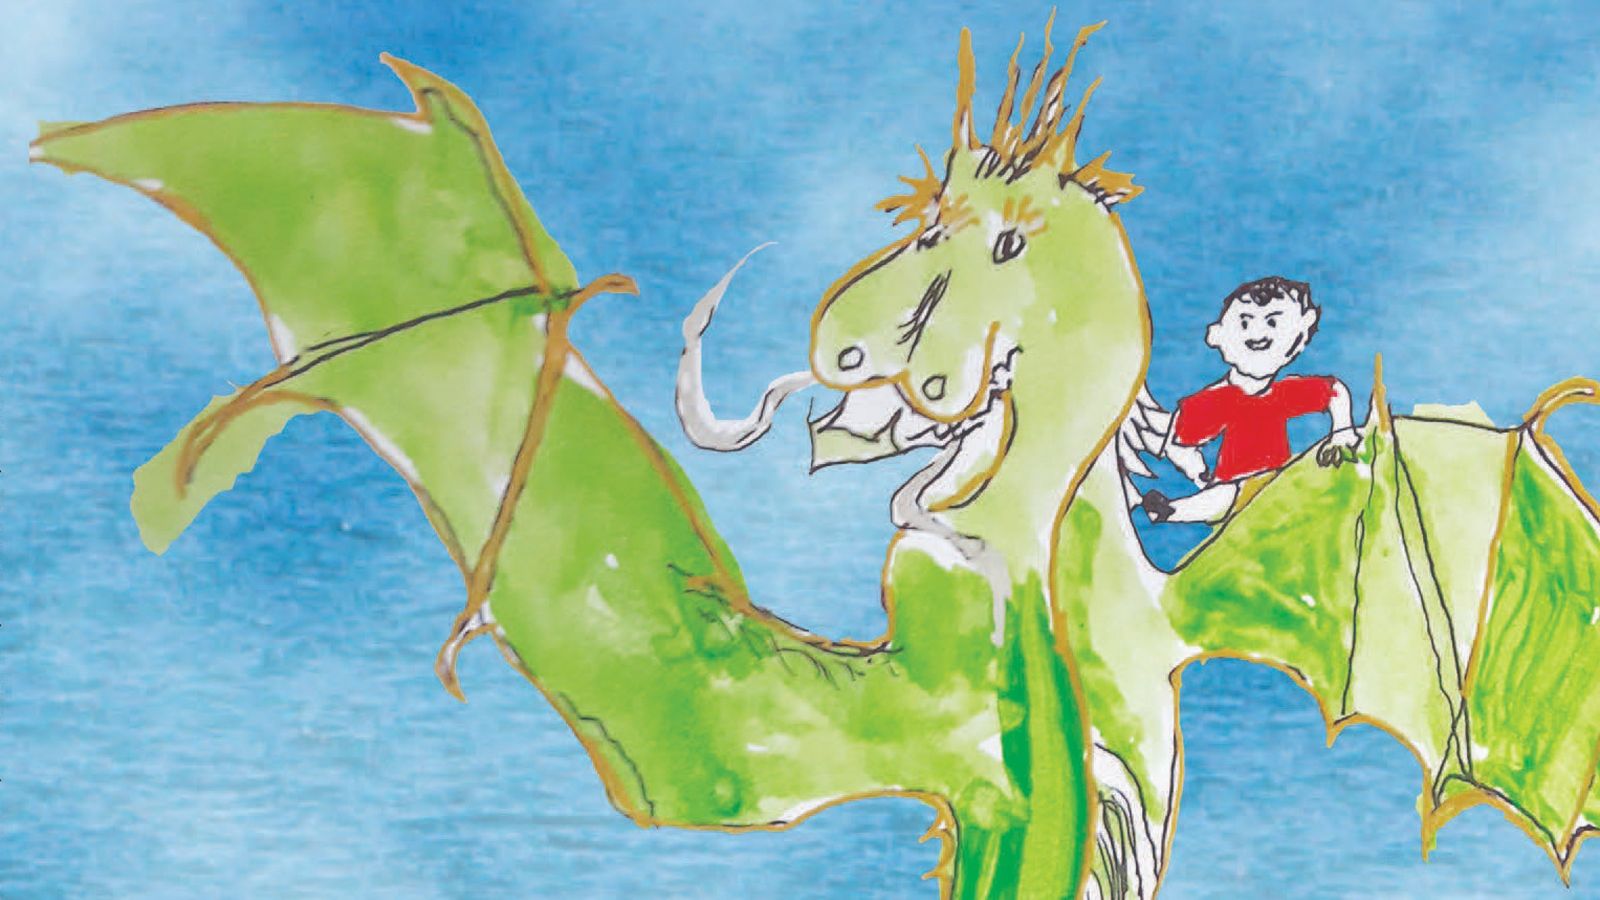 A drawing of a young boy riding a green dragon.